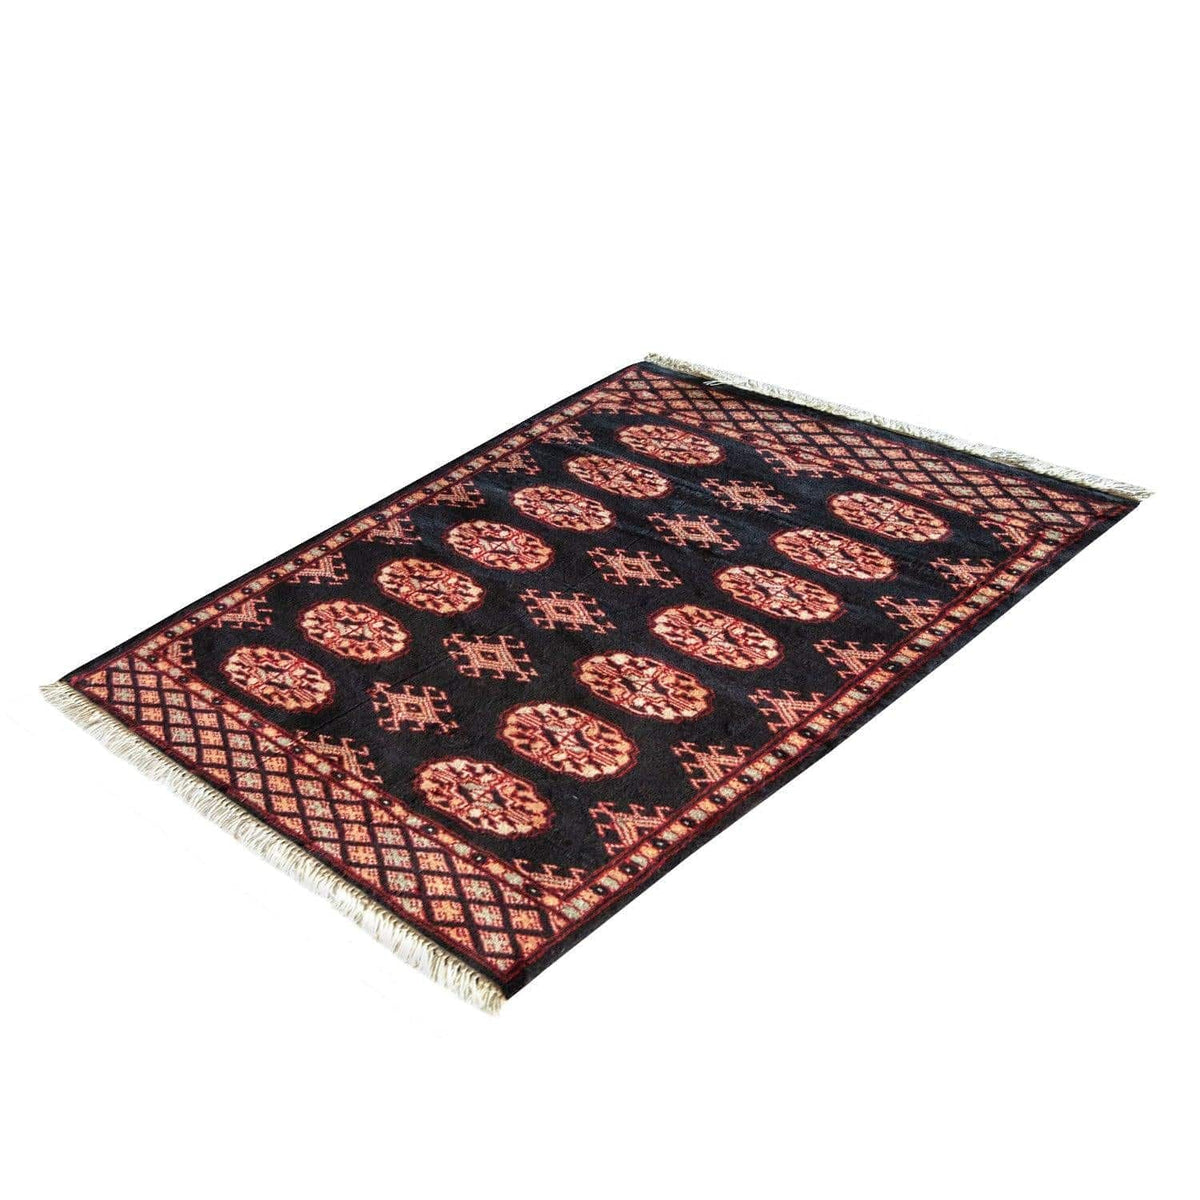 Traditional Hand-knotted Wool Bokhara Small Rug 66cm x 88cm